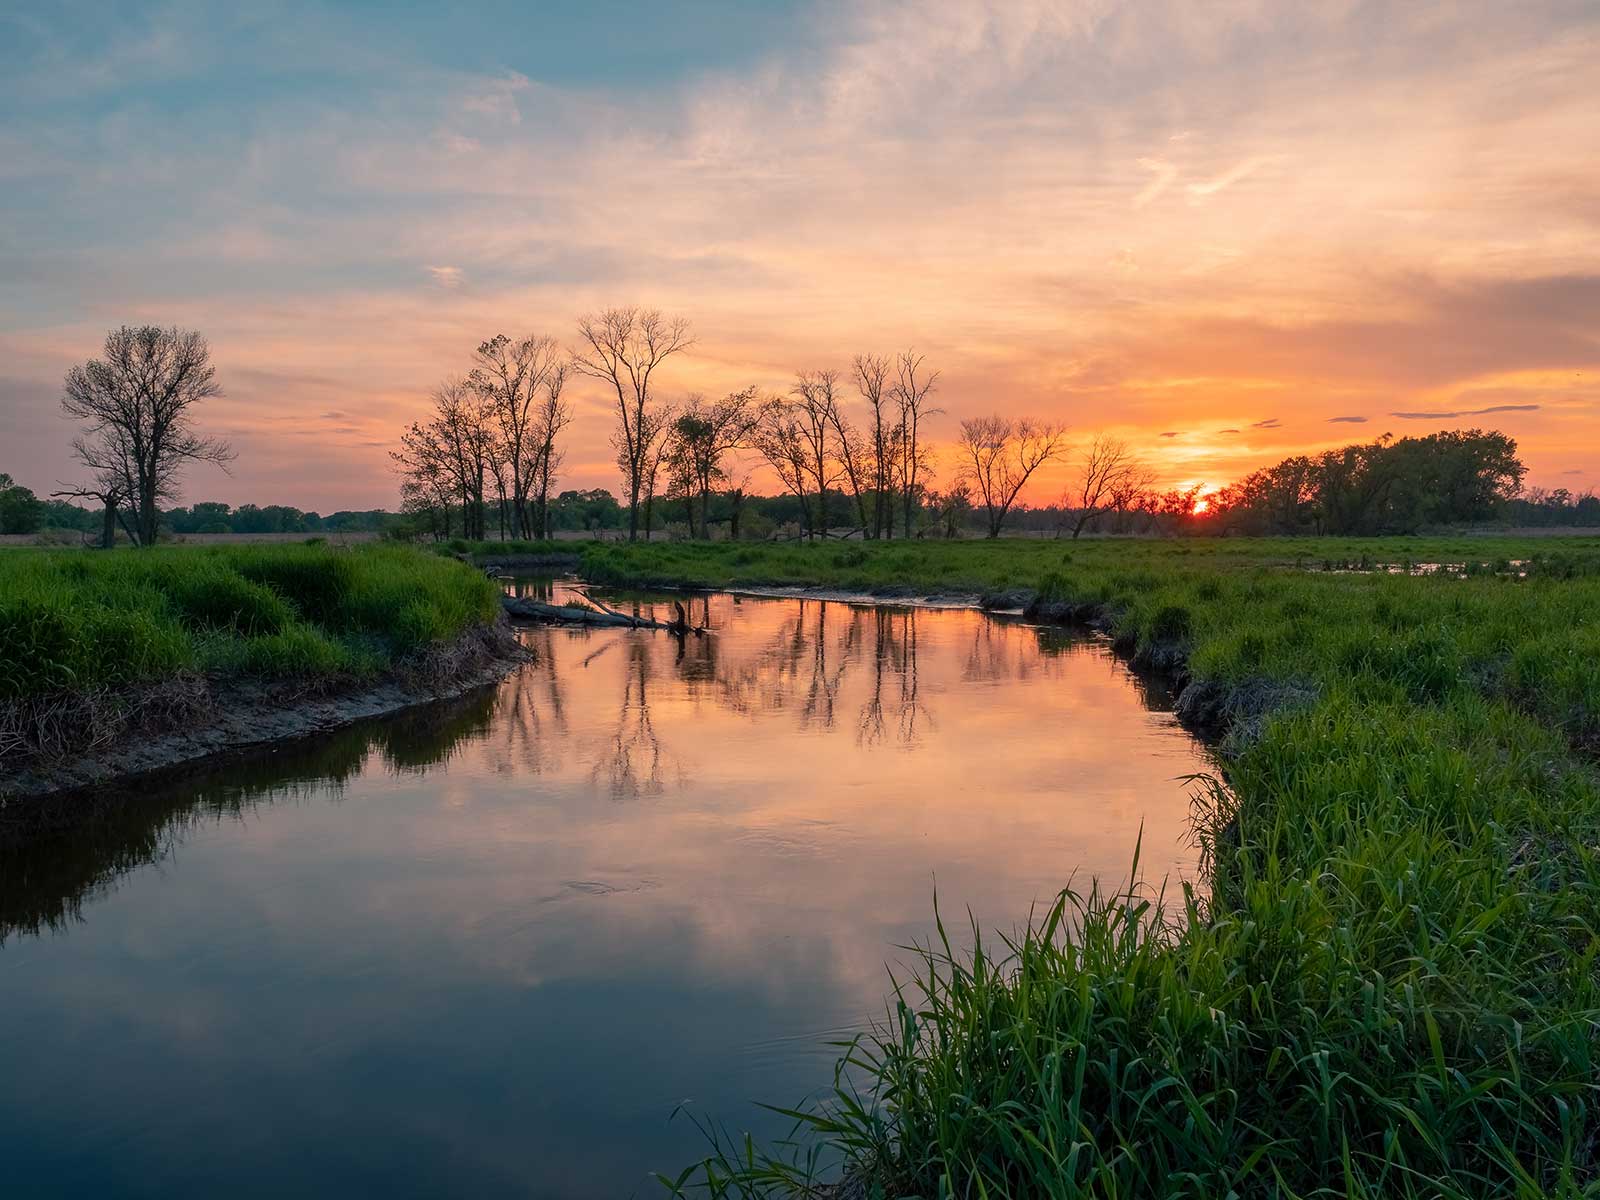 A sunset over a small stream with lush green surrondings